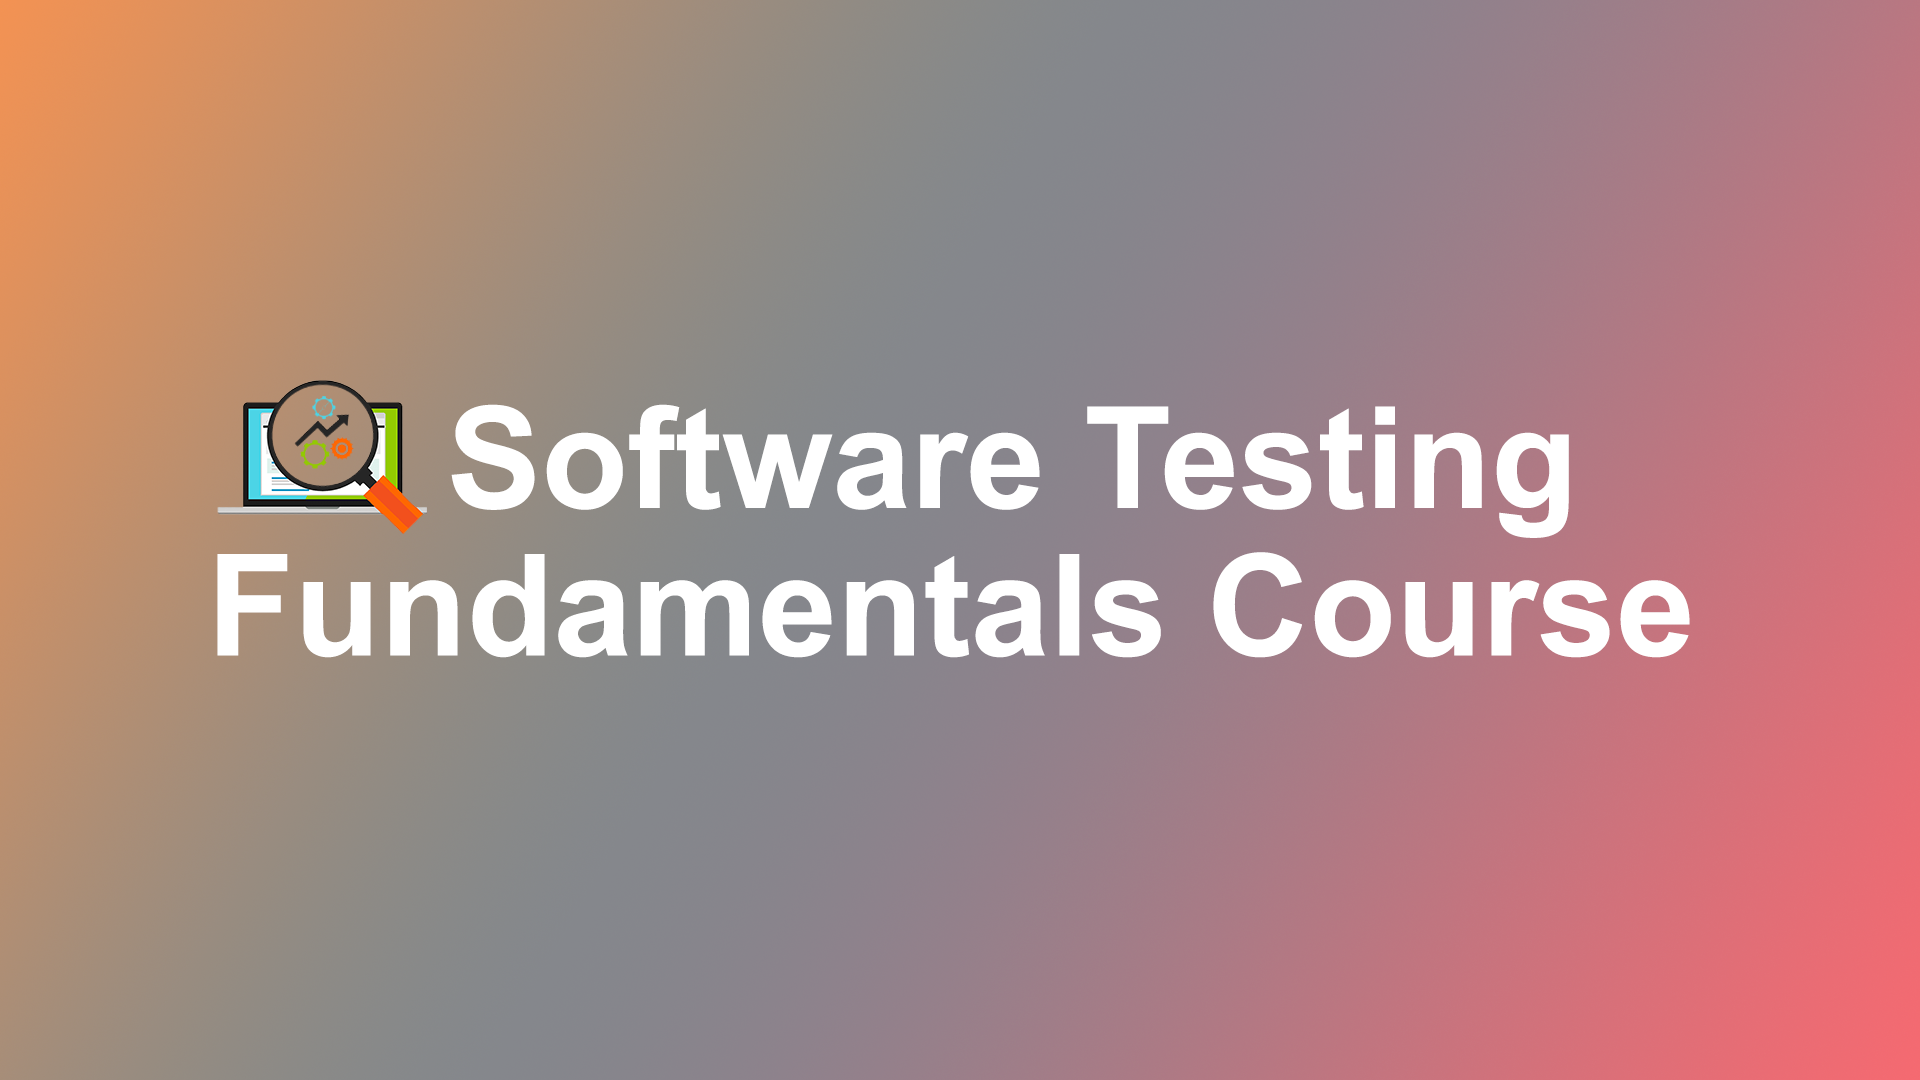 Software Testing Fundamentals Course Training